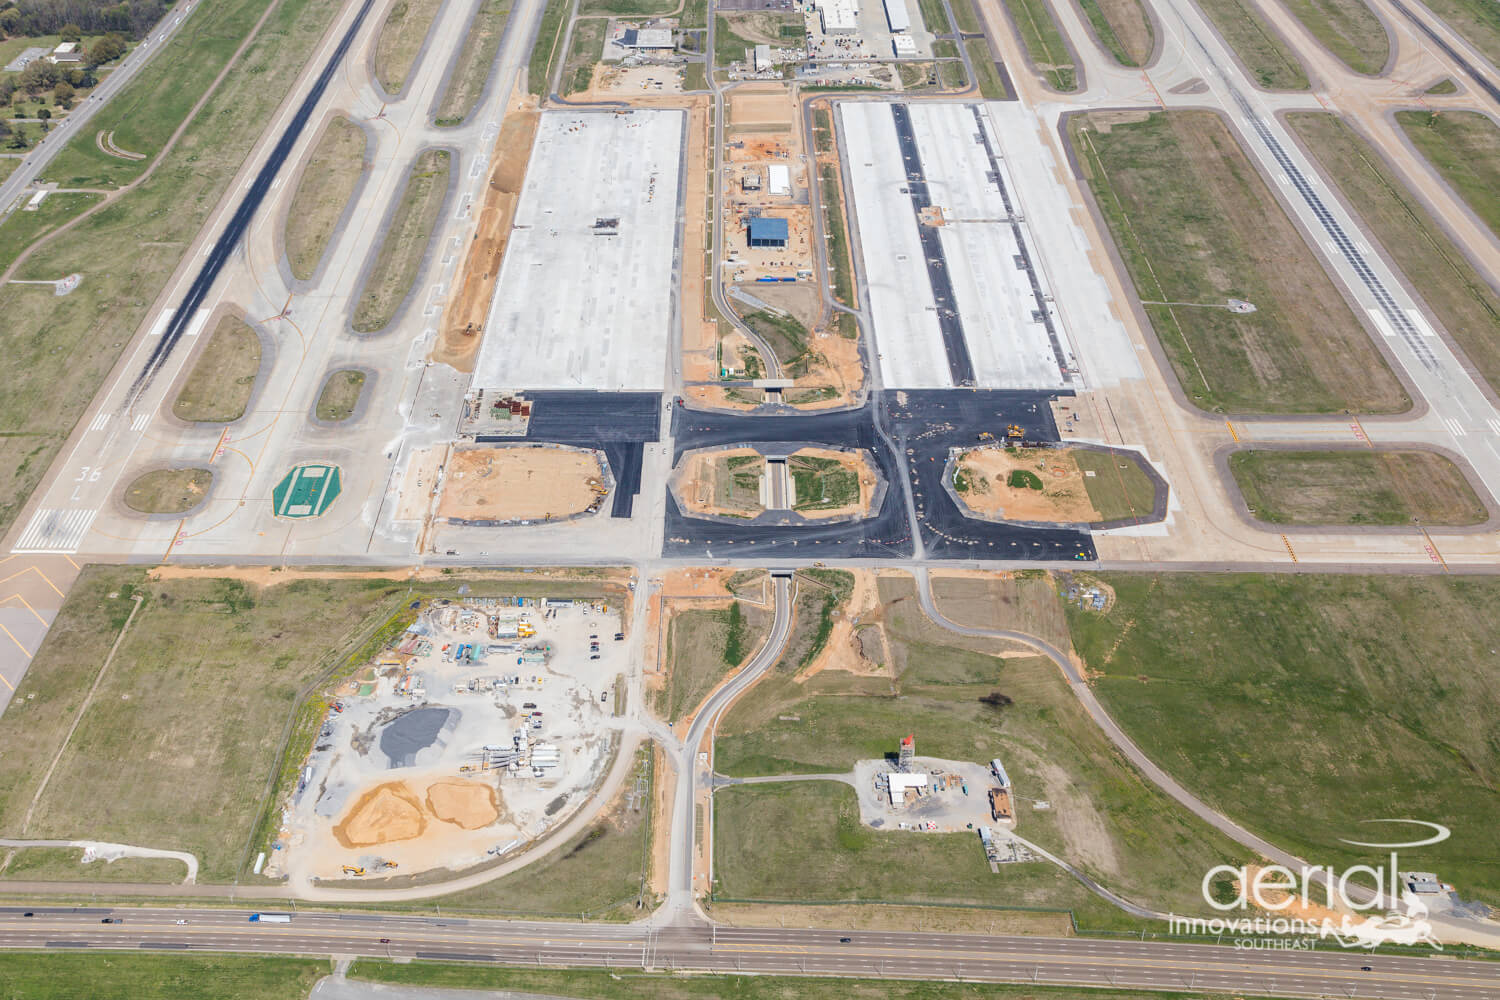 Photo of the McGhee Tyson Airport Runway construction project.